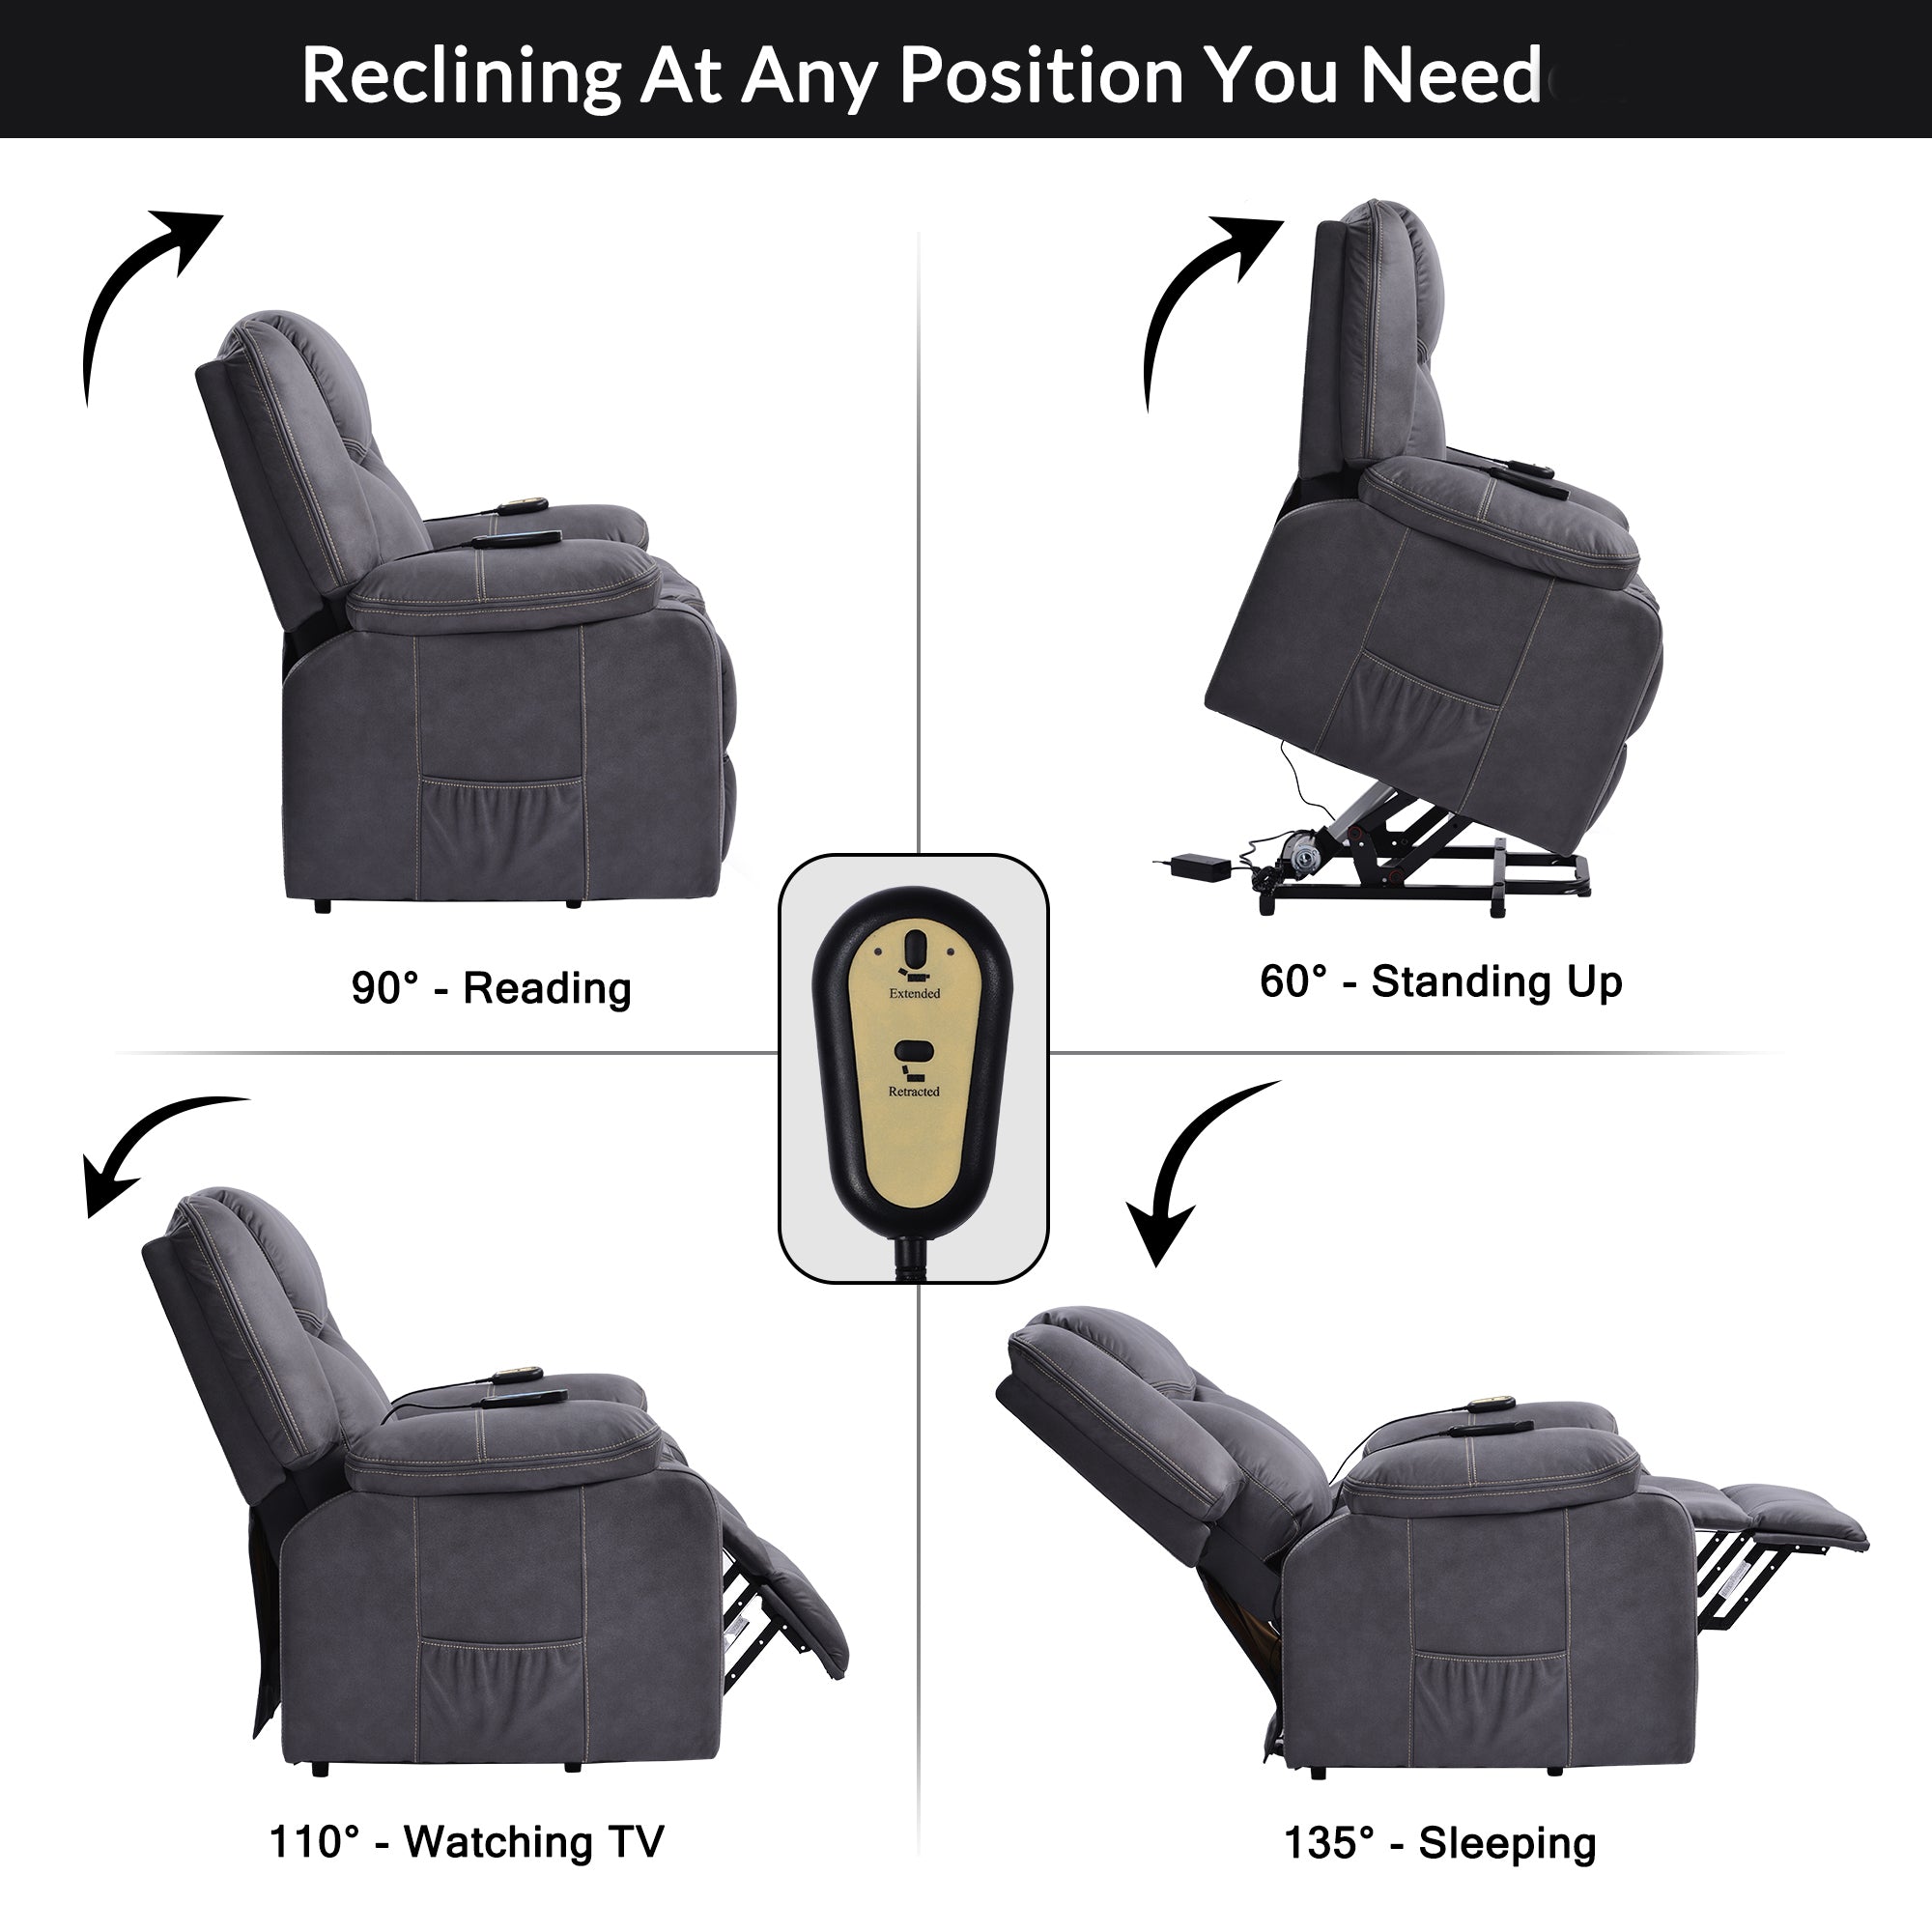 Power Lift Recliner Chair with Heat and Massage, degrees of positions